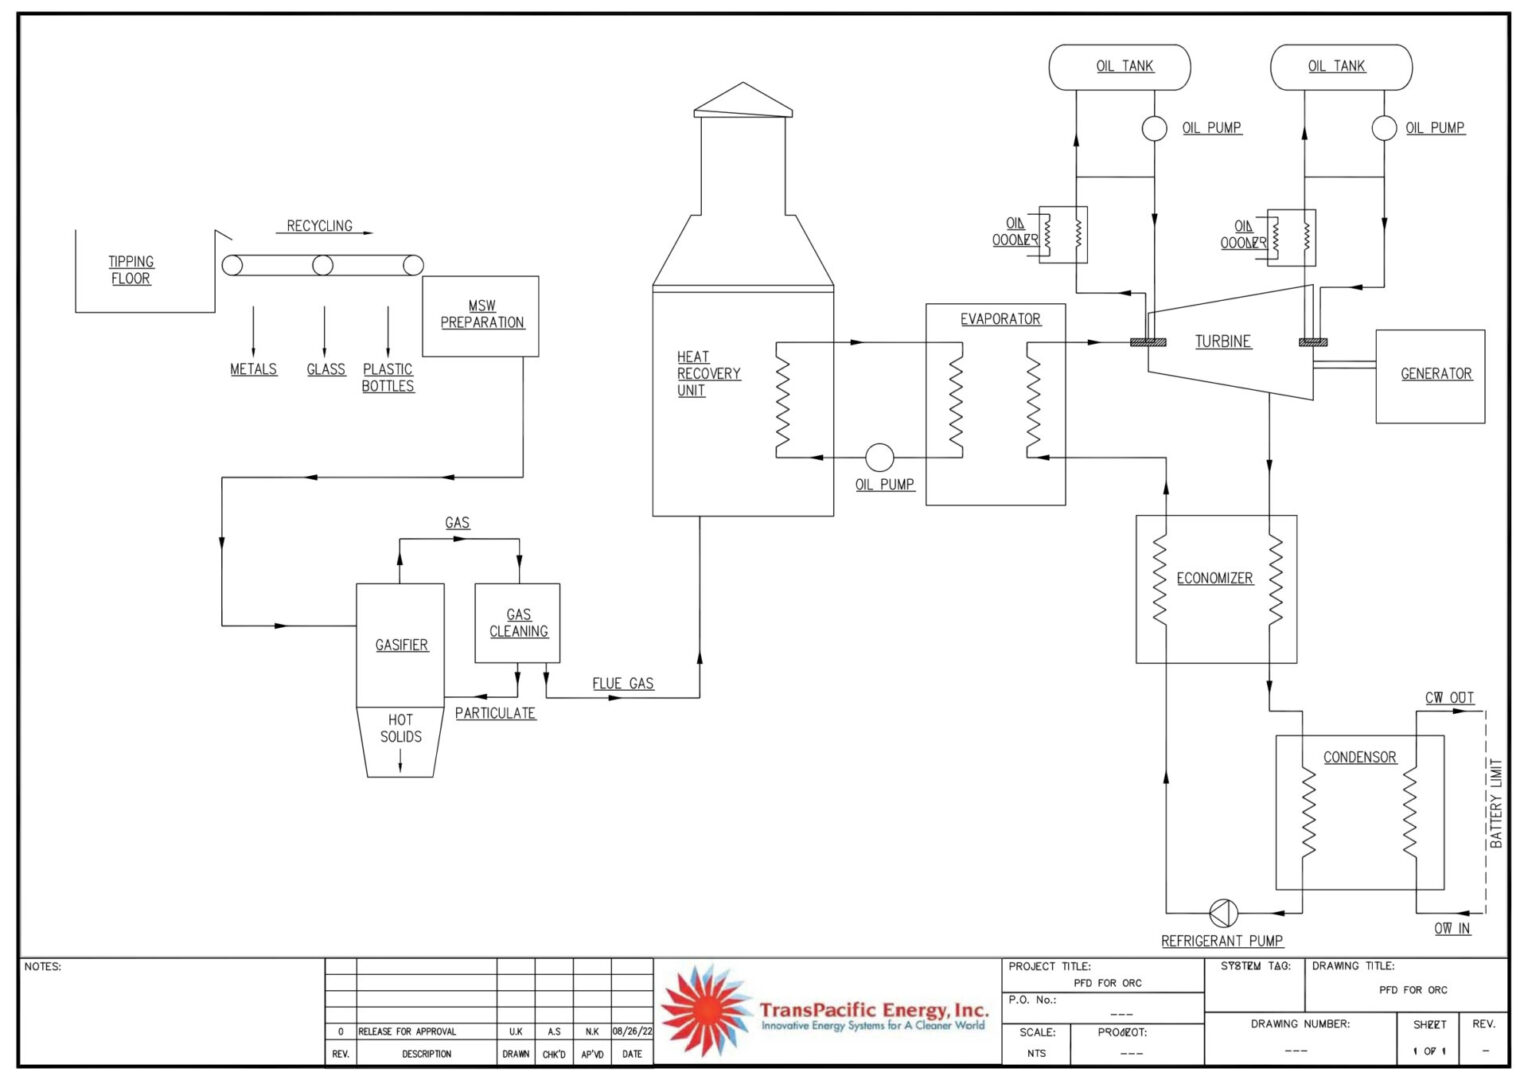 A drawing of the process flow for a plant.